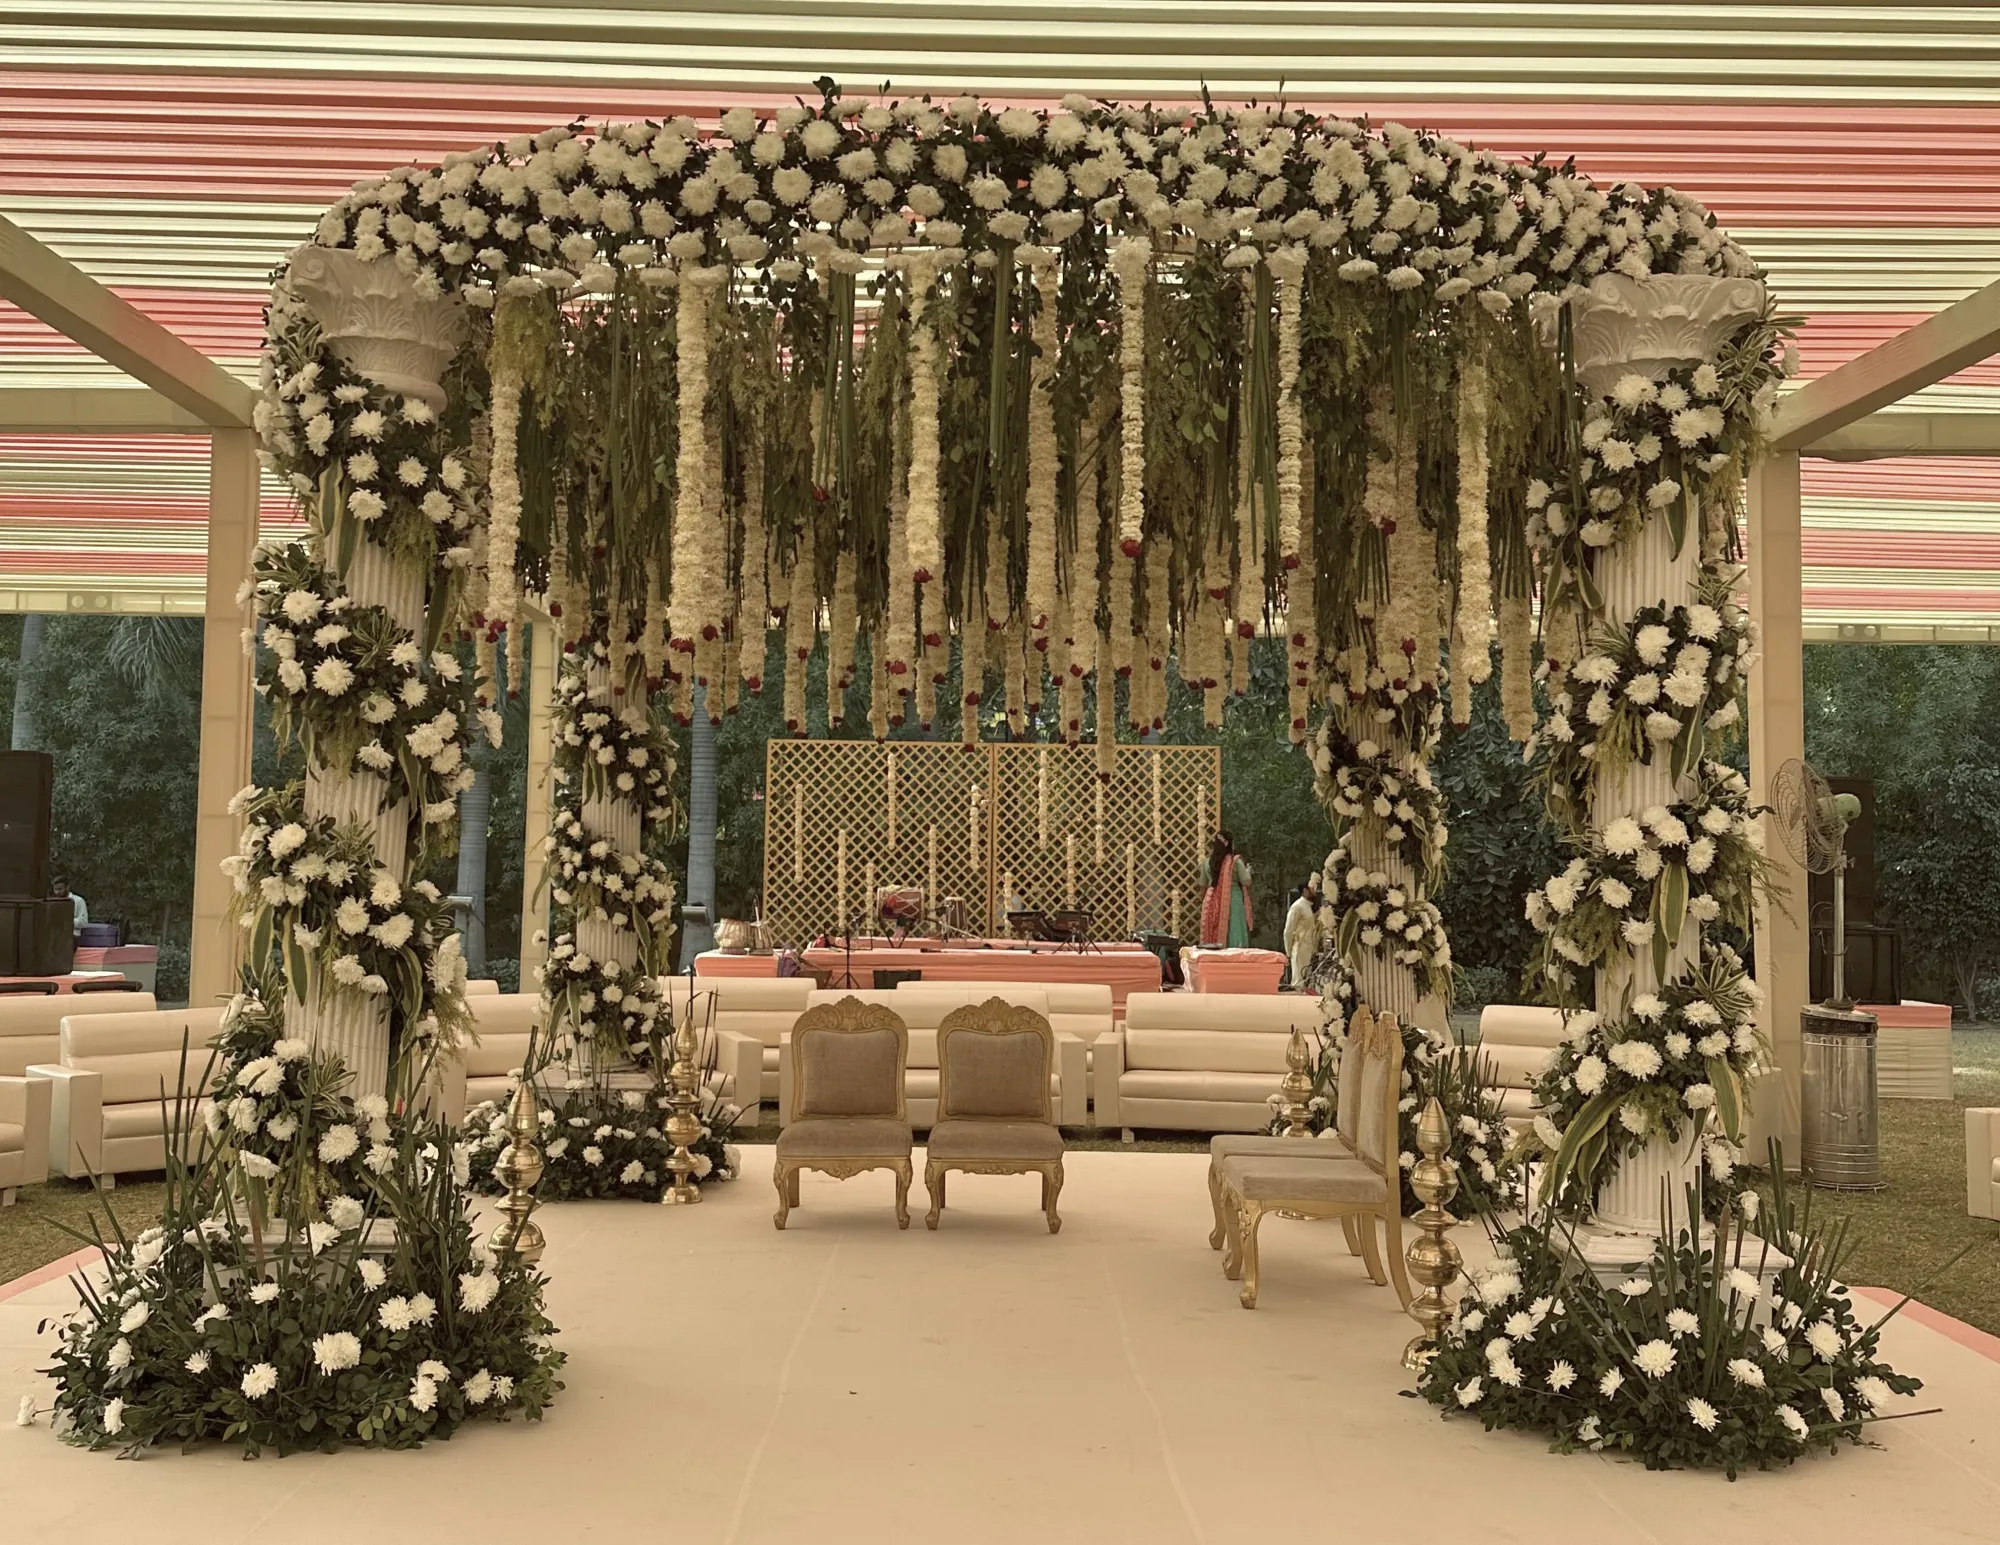 White mandap with four columns covered in a garland of white flowers with flowers hanging from the top under a pink and white canopy